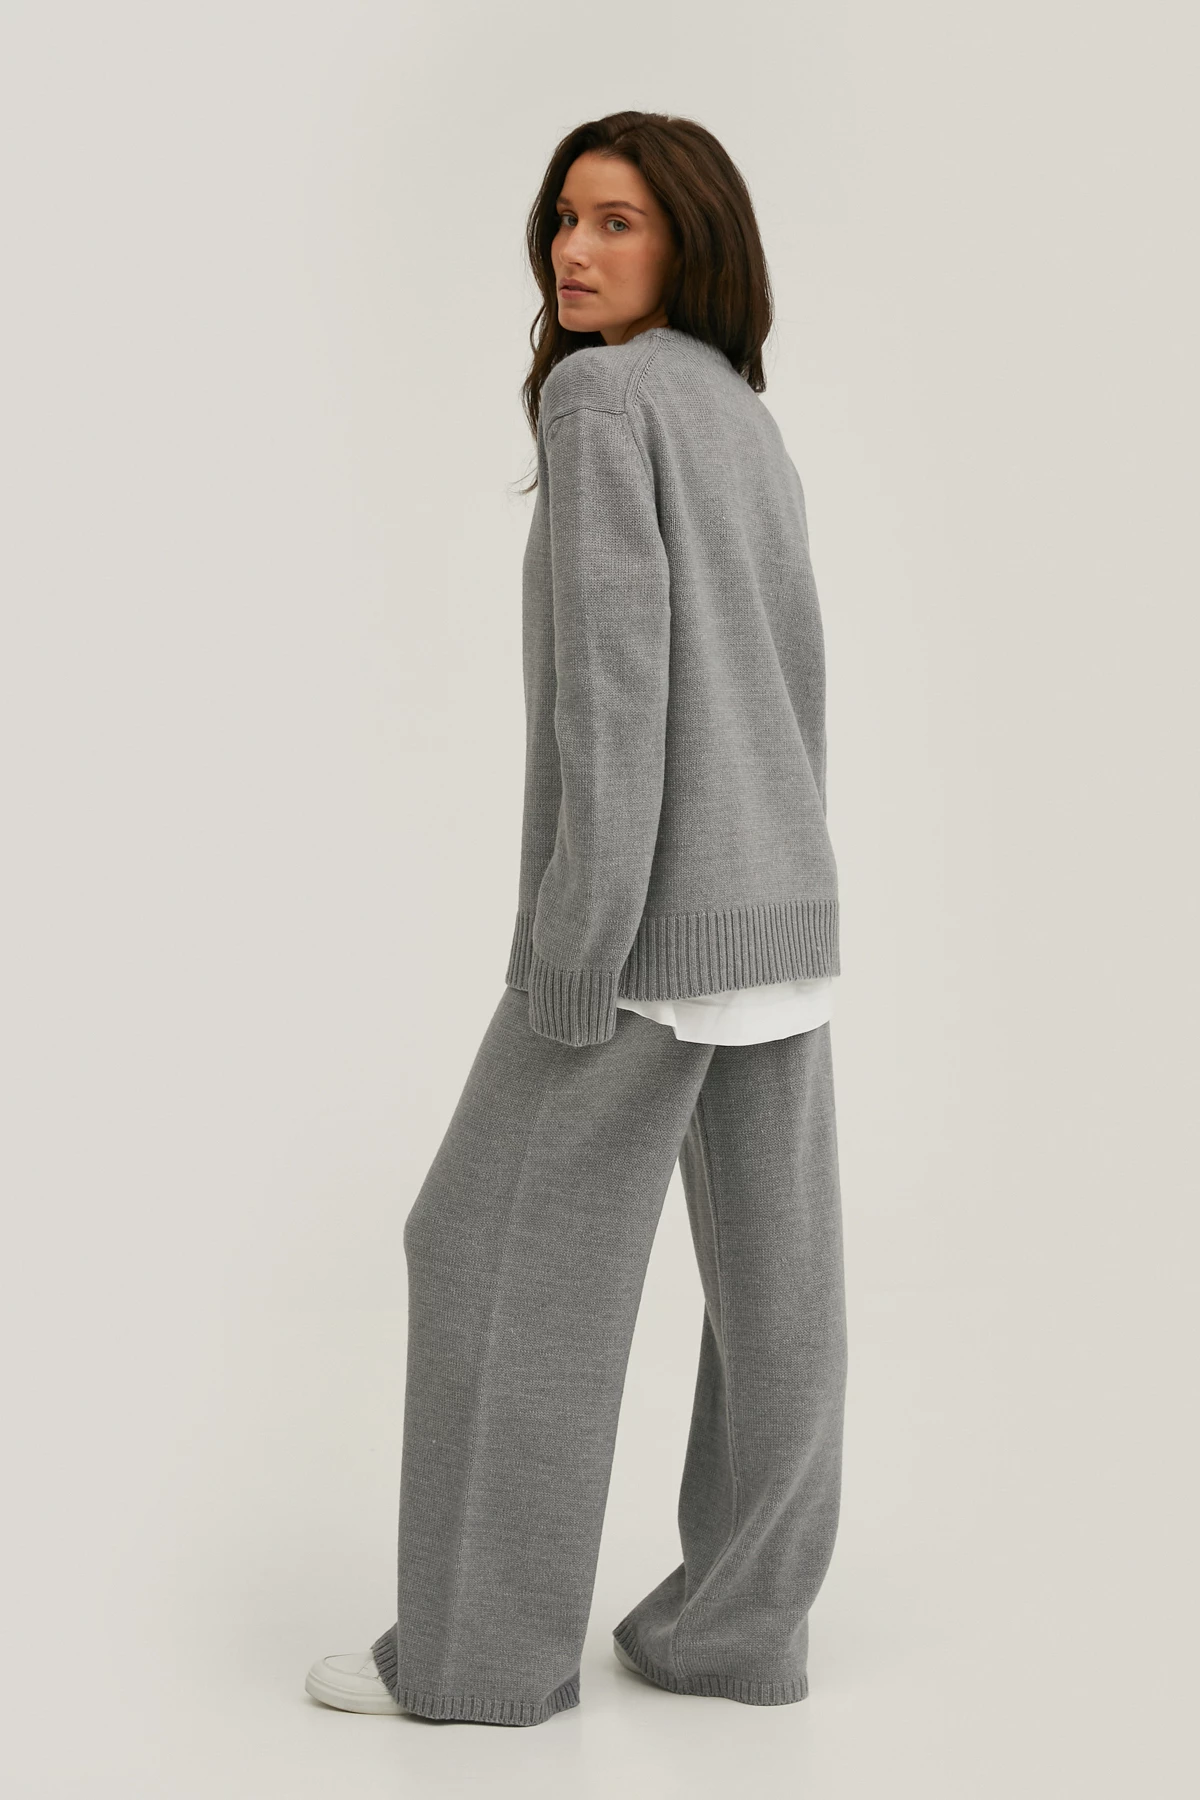 Grey knitted sweater with merino wool, photo 3